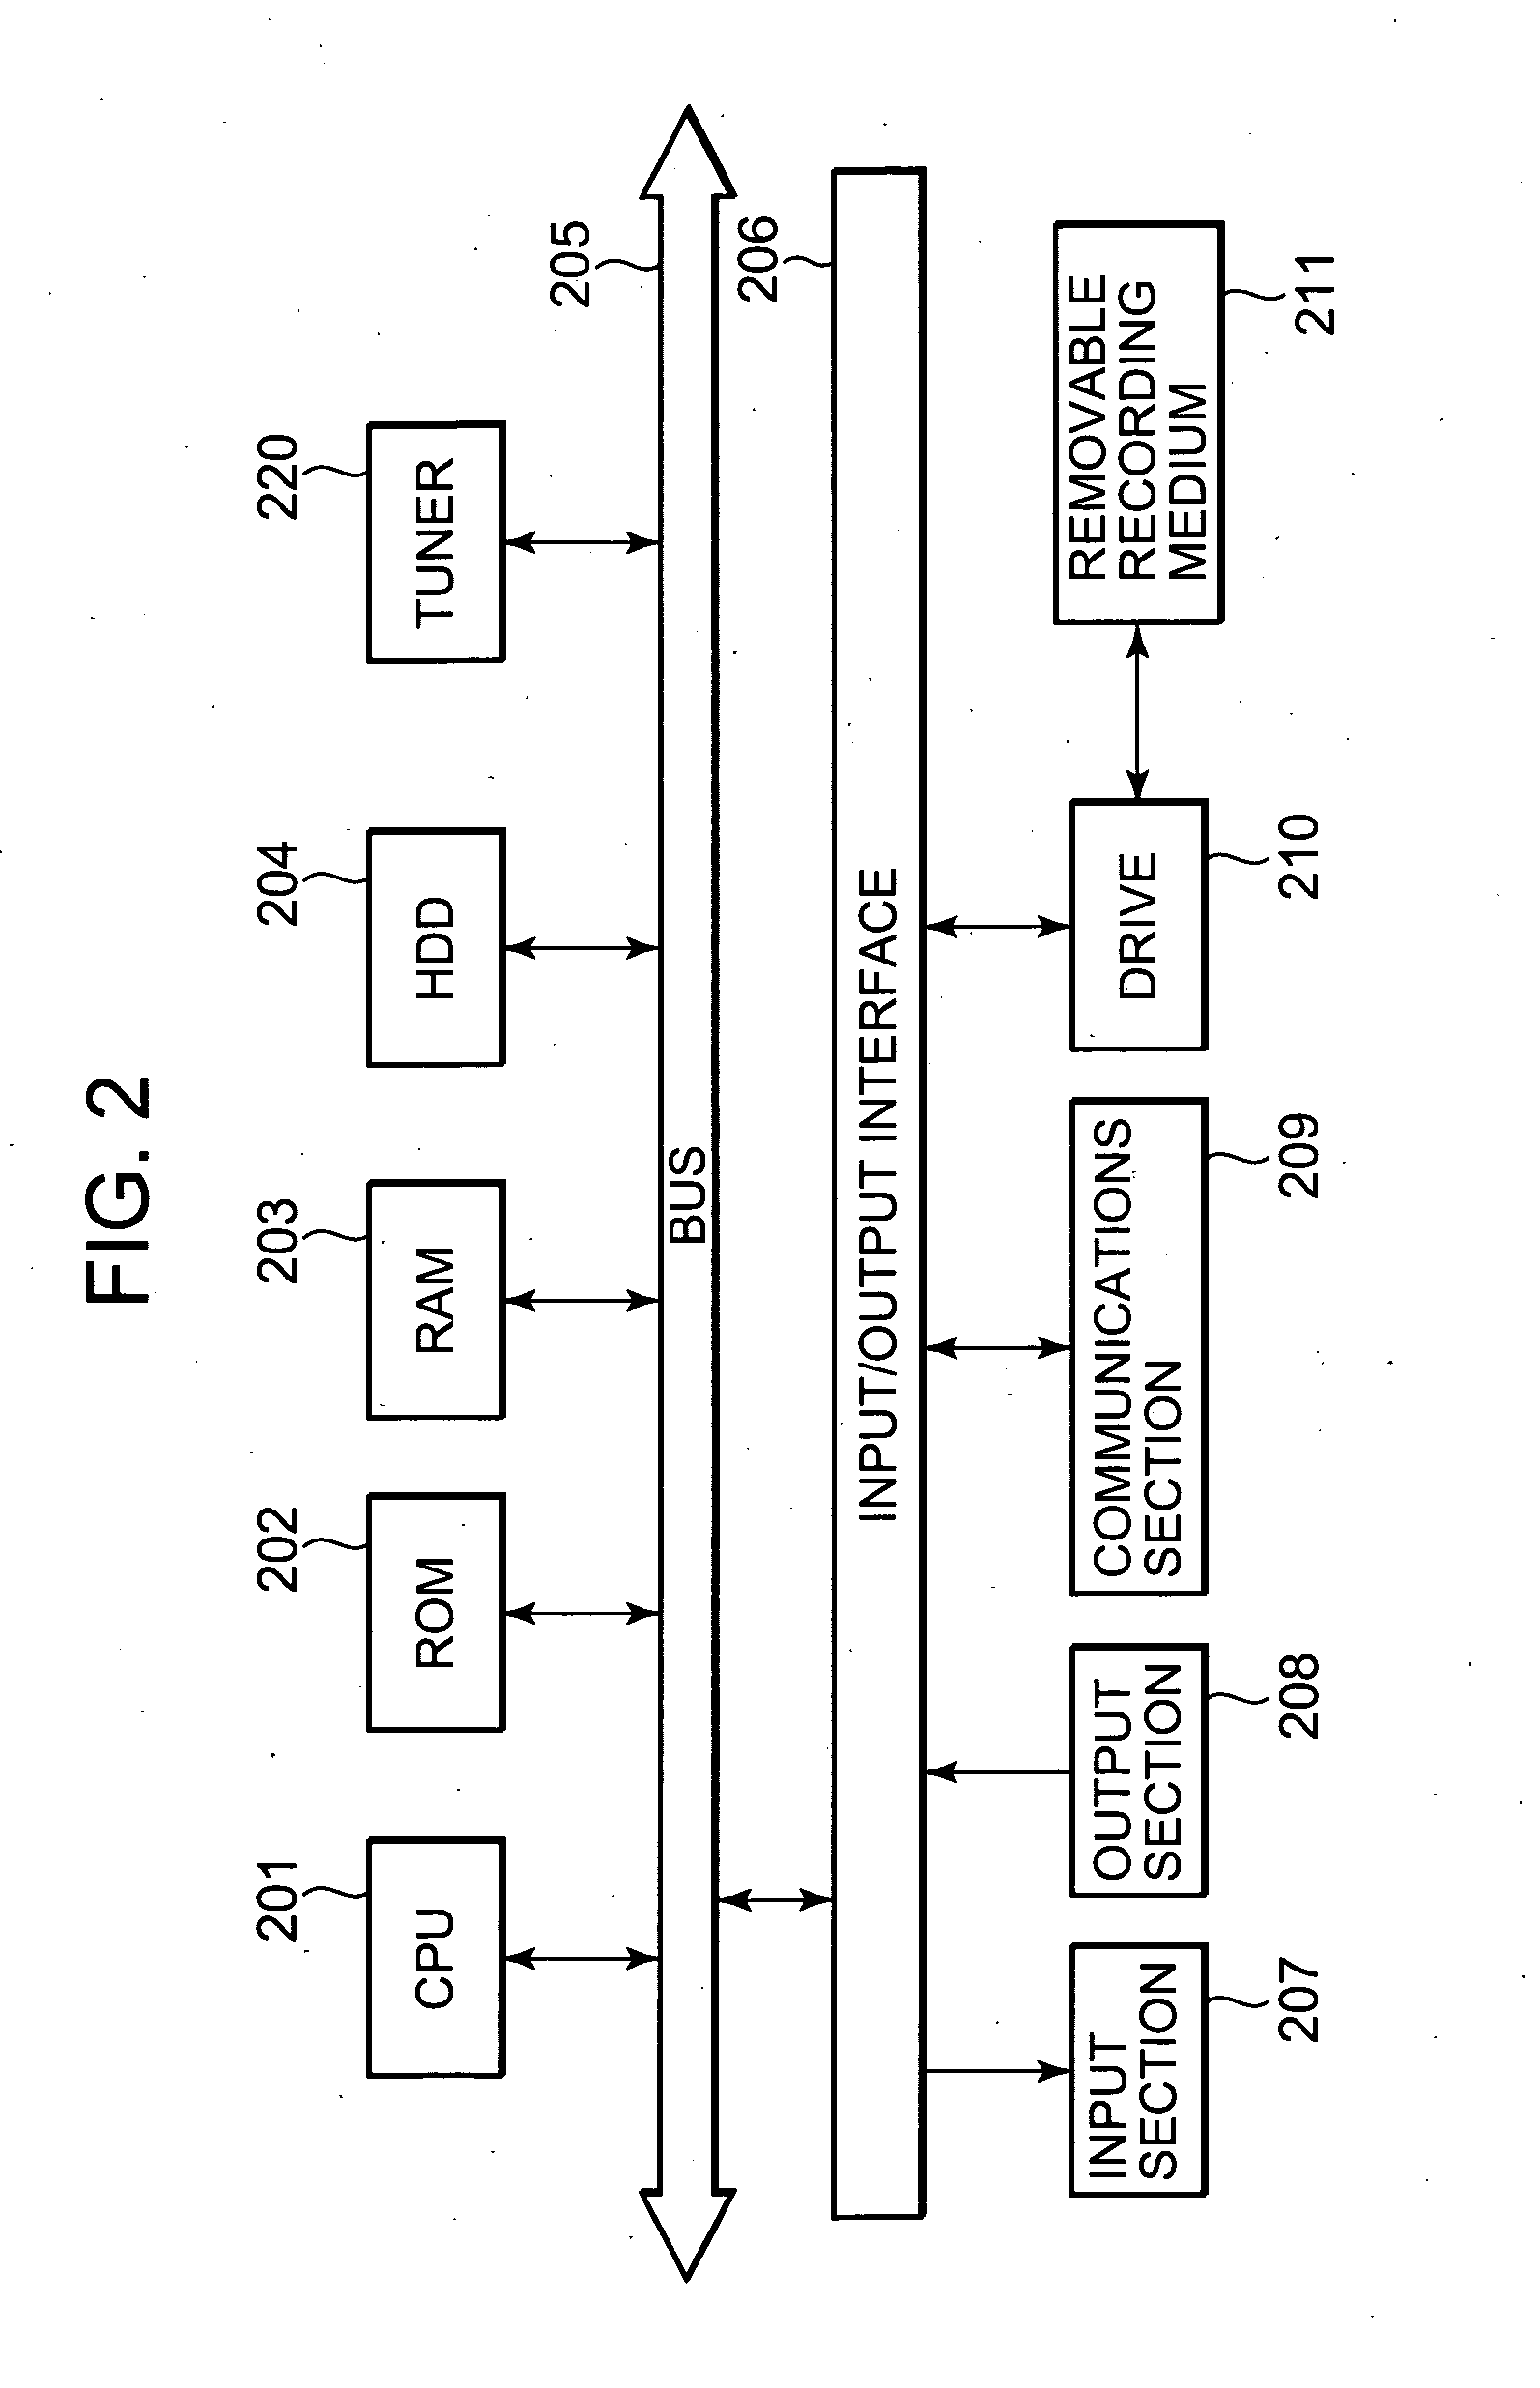 Content providing server, information processing device and method, and computer program